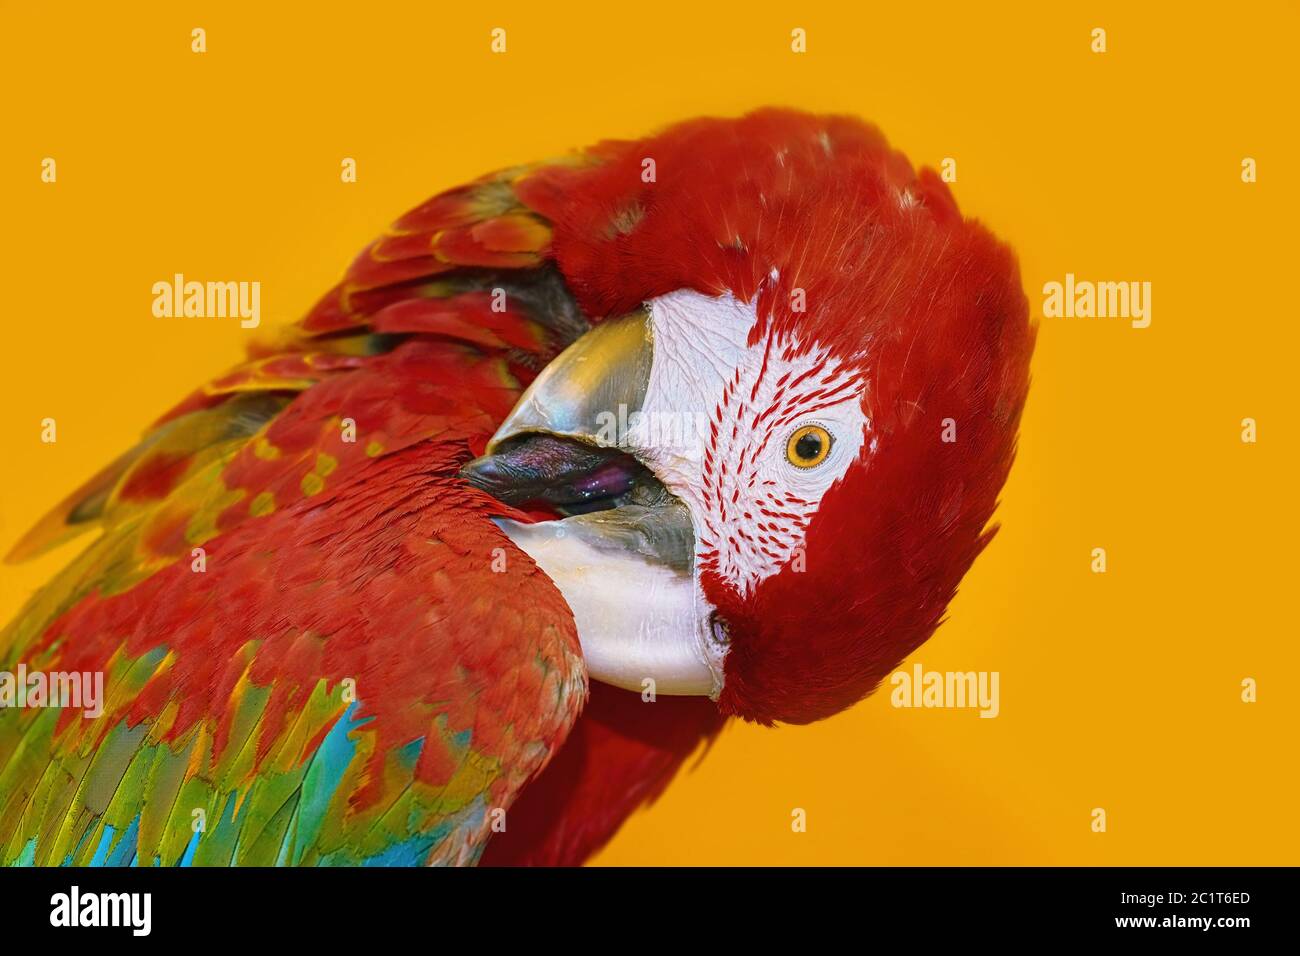 The Macaw Parrot Stock Photo